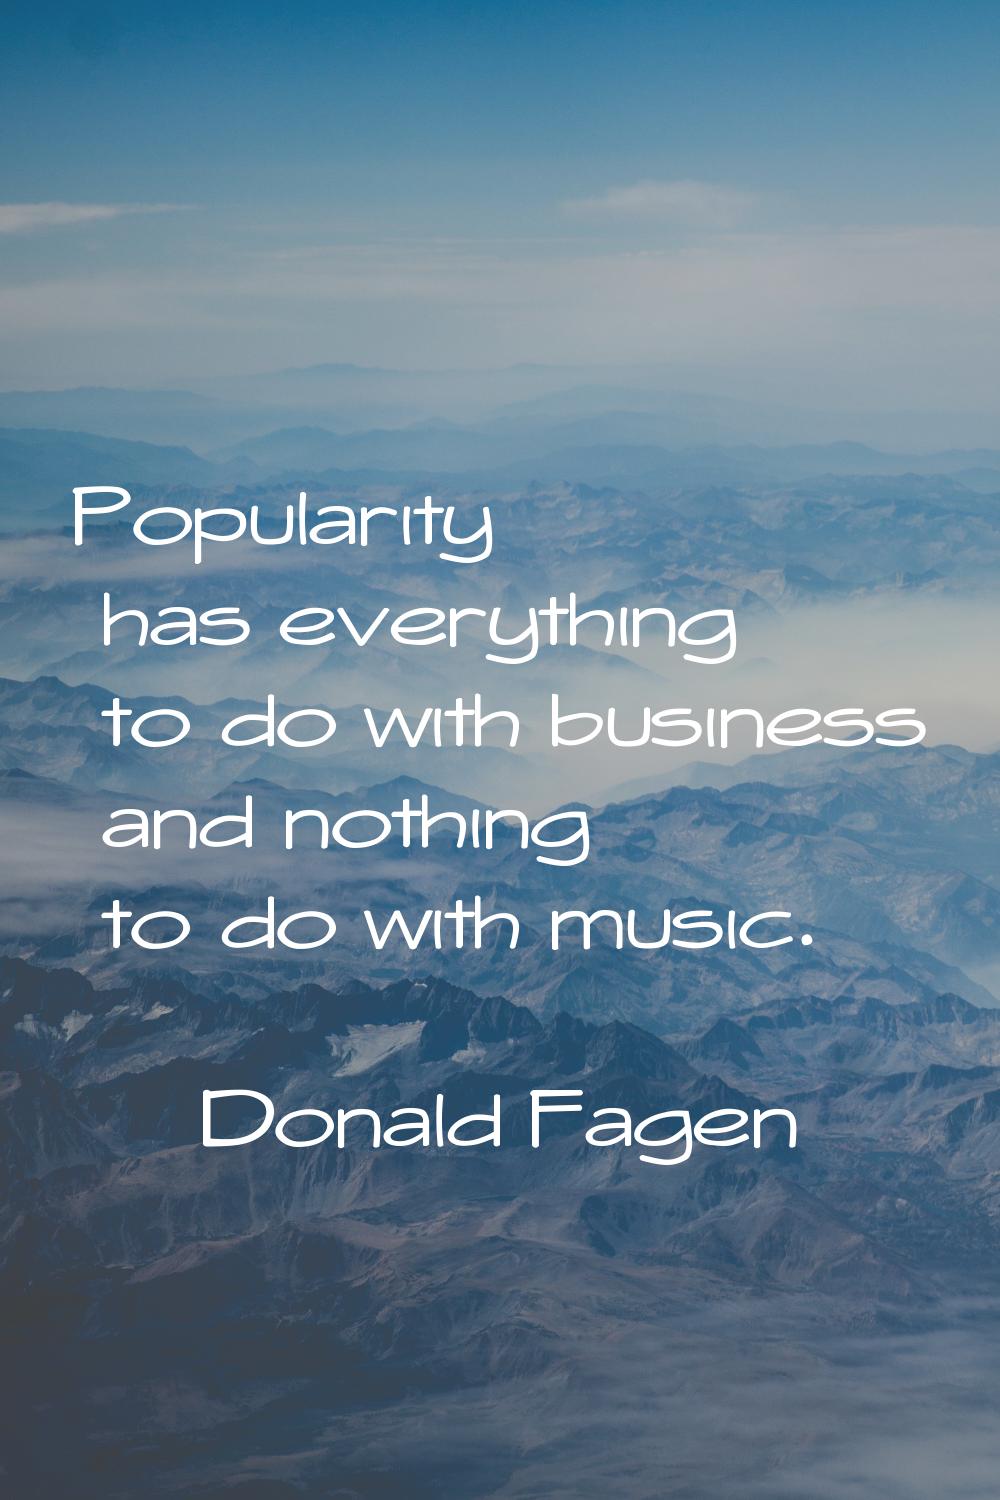 Popularity has everything to do with business and nothing to do with music.